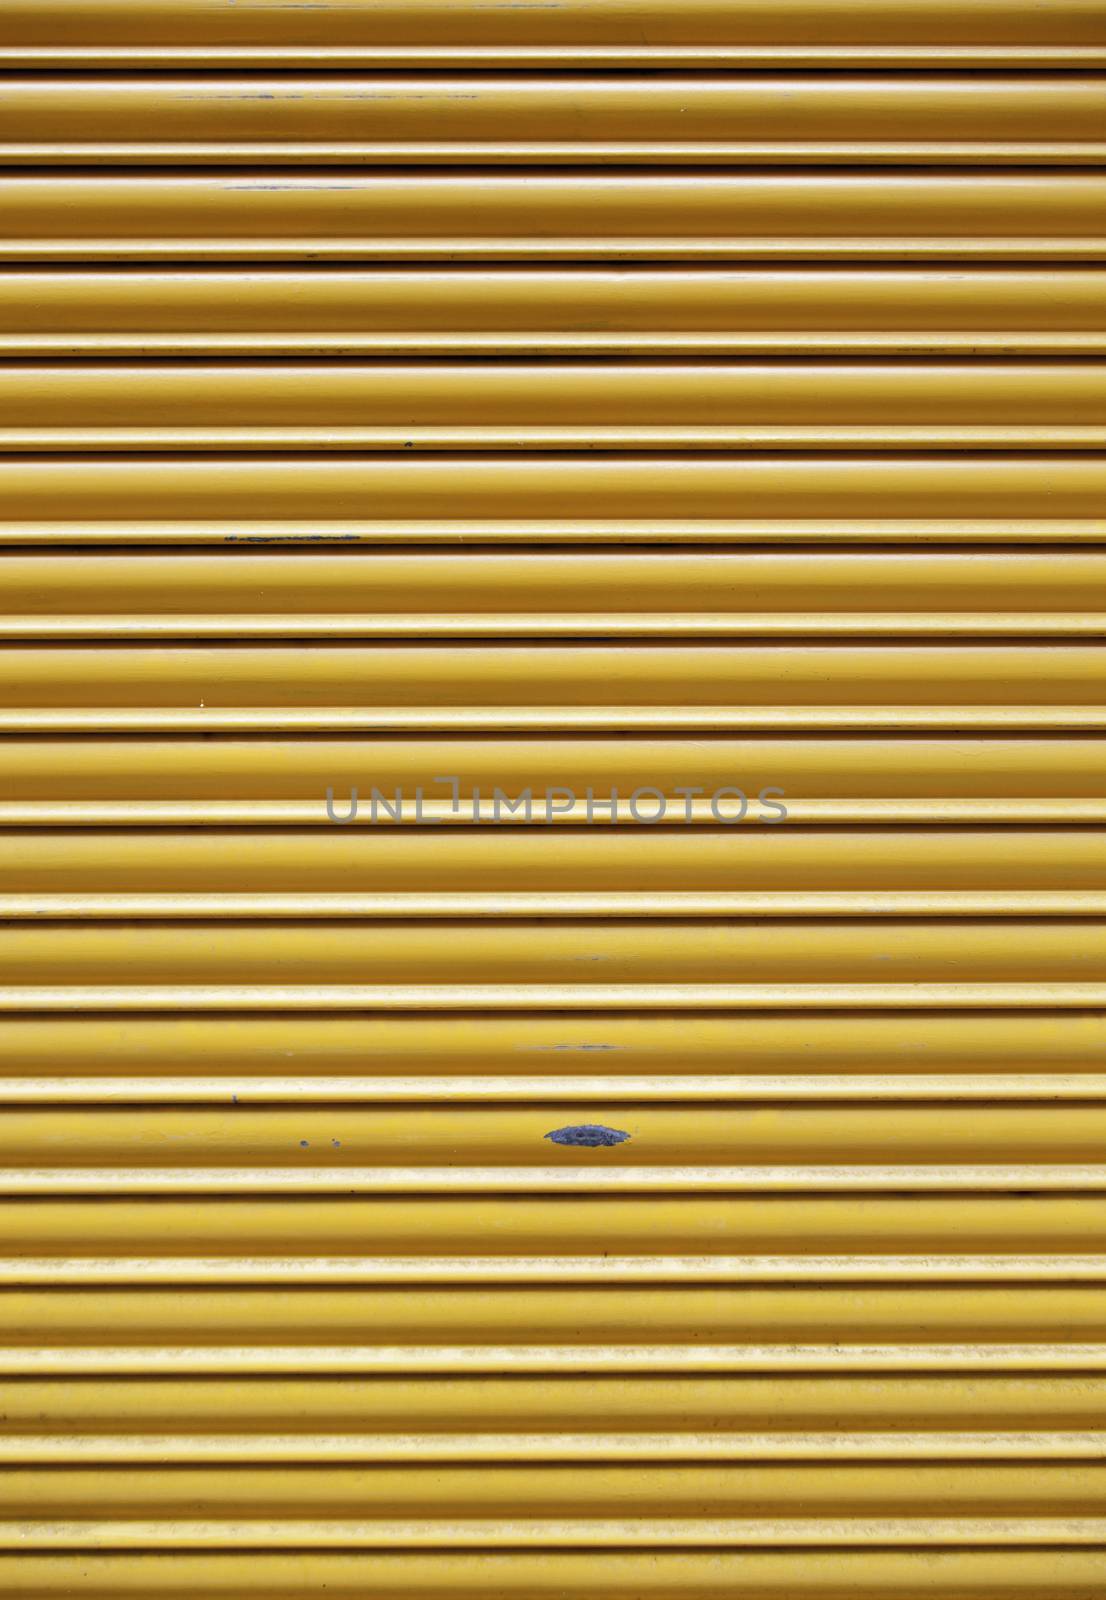 Yellow protective grille, protective detail element in the city, closed